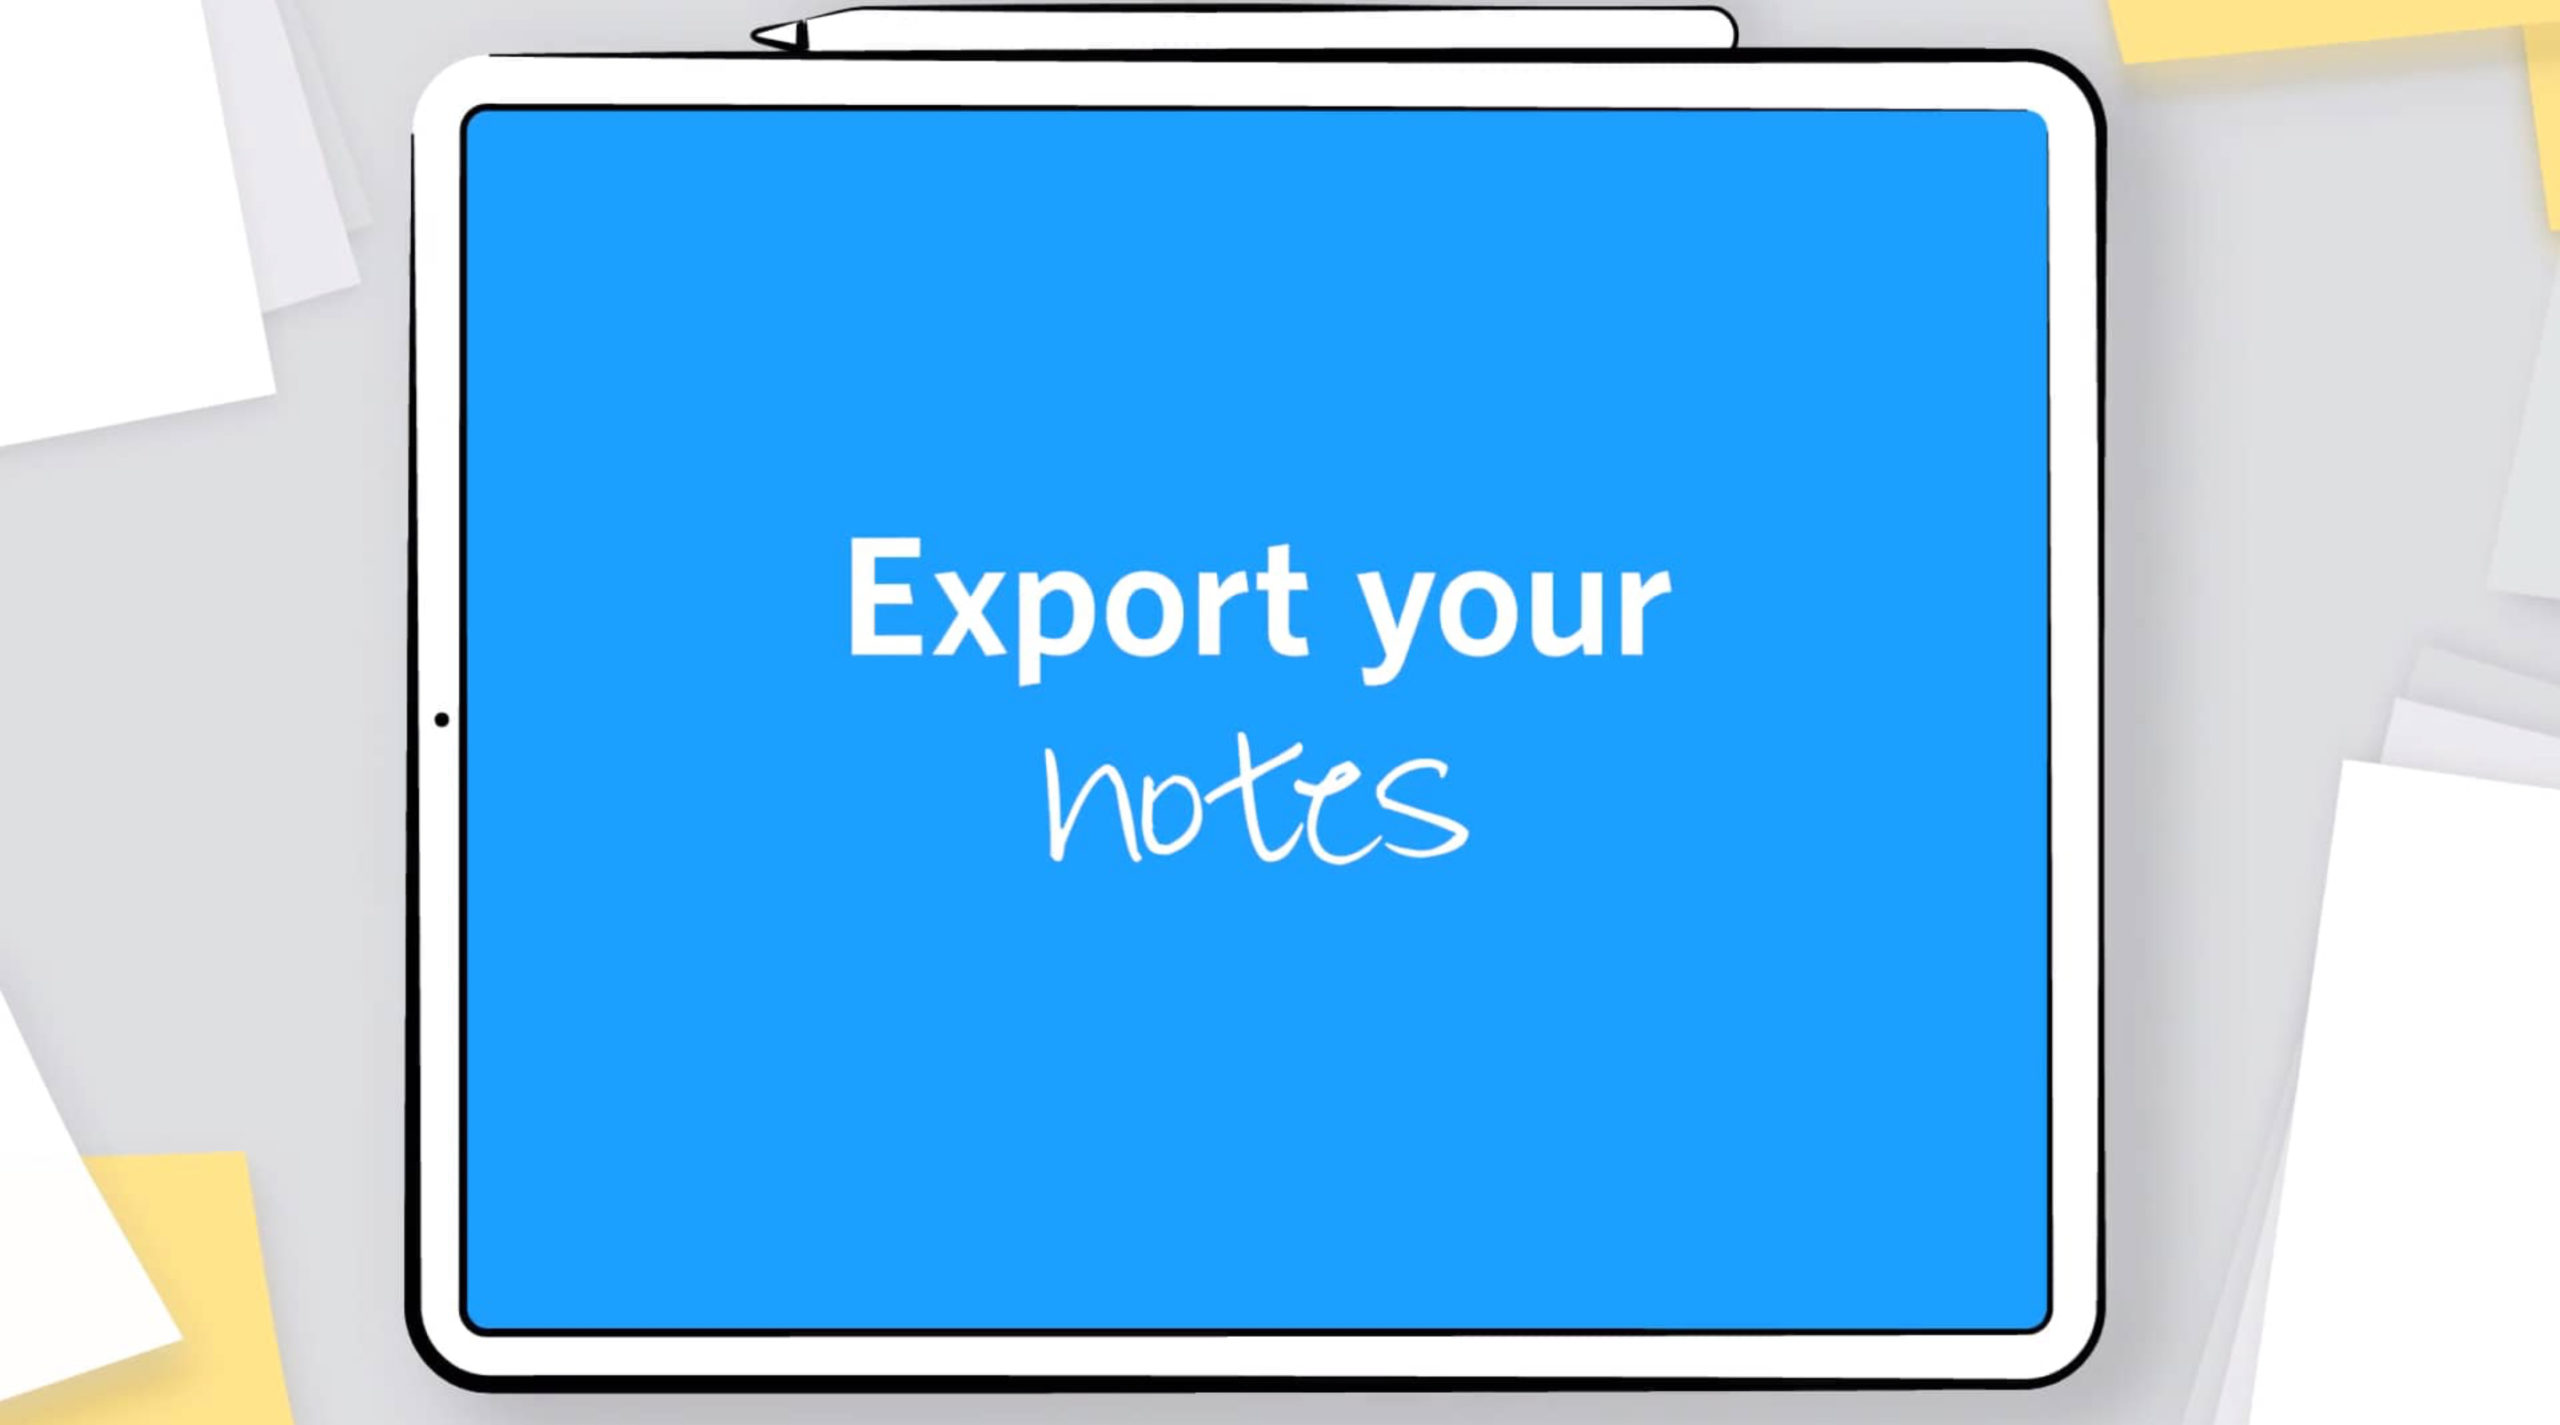 Export your notes